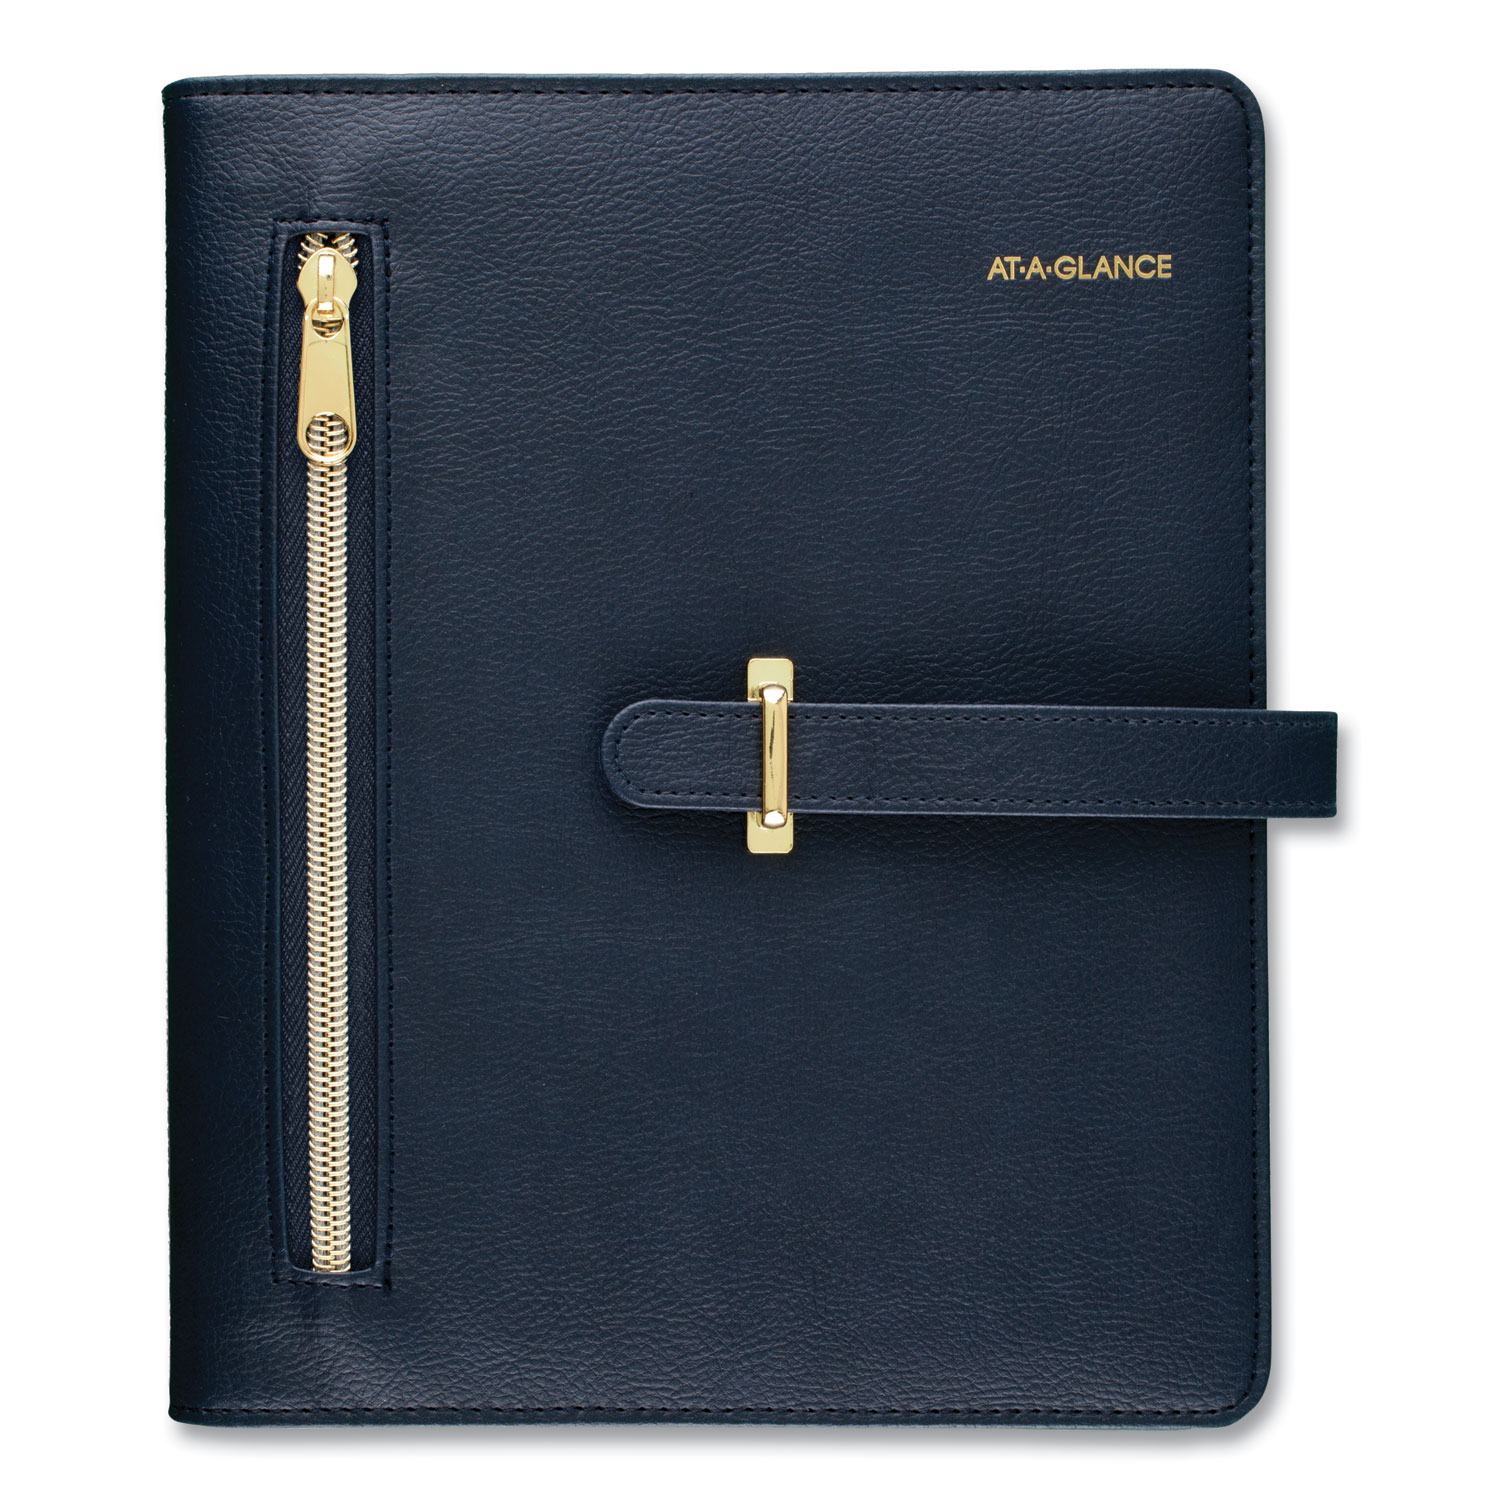  AT-A-GLANCE DR111804020 Buckle Closure Starter Set, 8.5 x 5.5, Navy (AAGDR111804020) 